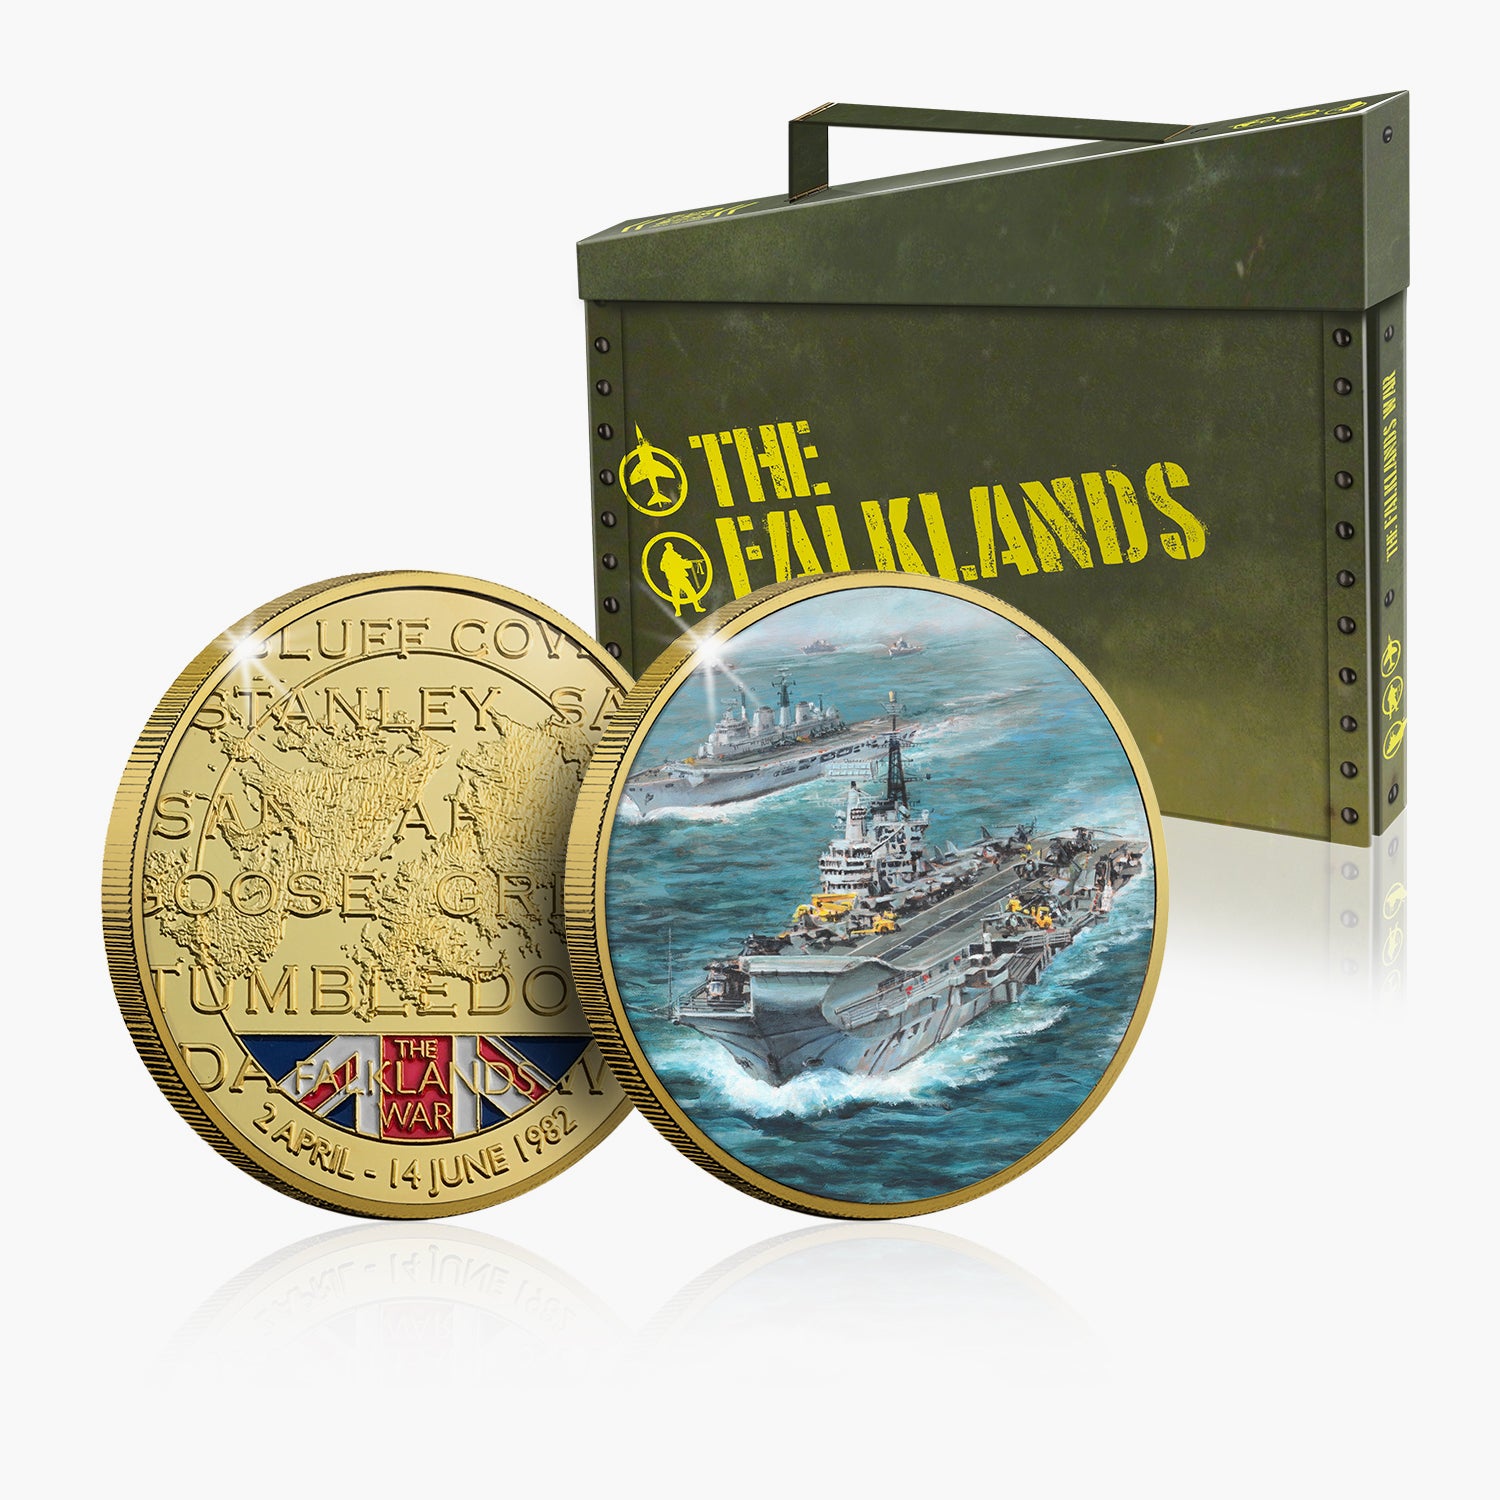 The Story of the Falklands Collection